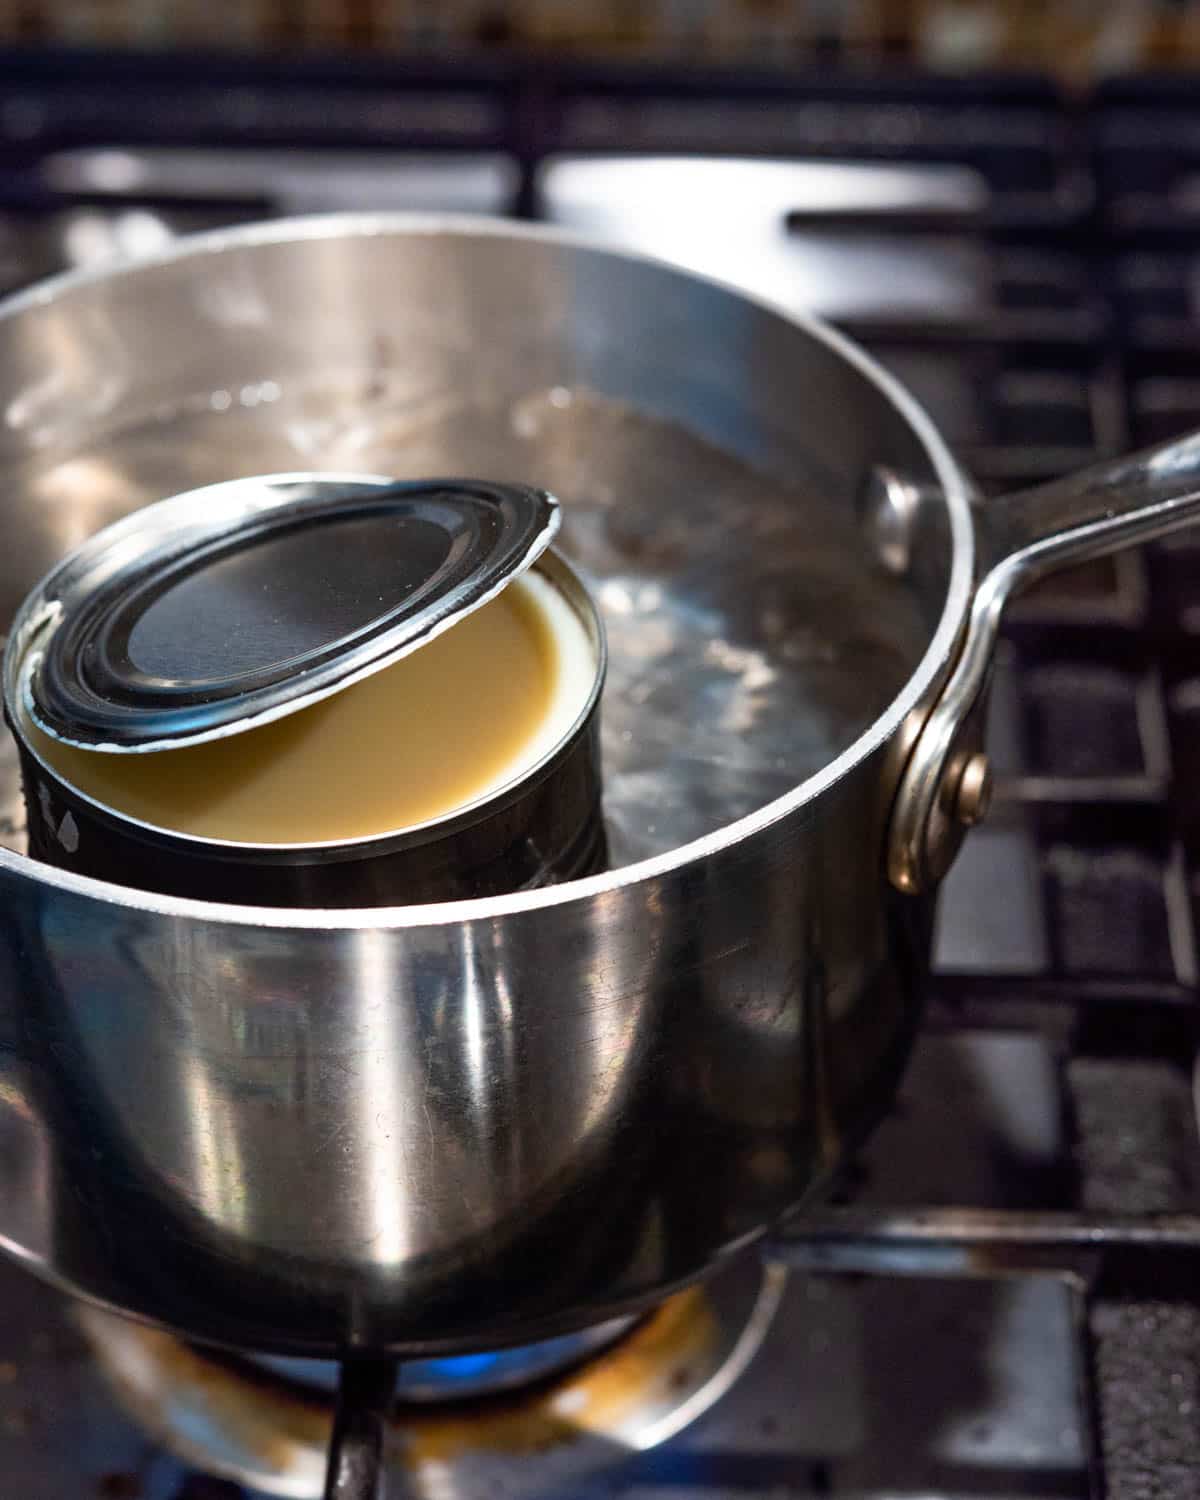 I am simmering the condensed milk in a water bath on the stovetop.